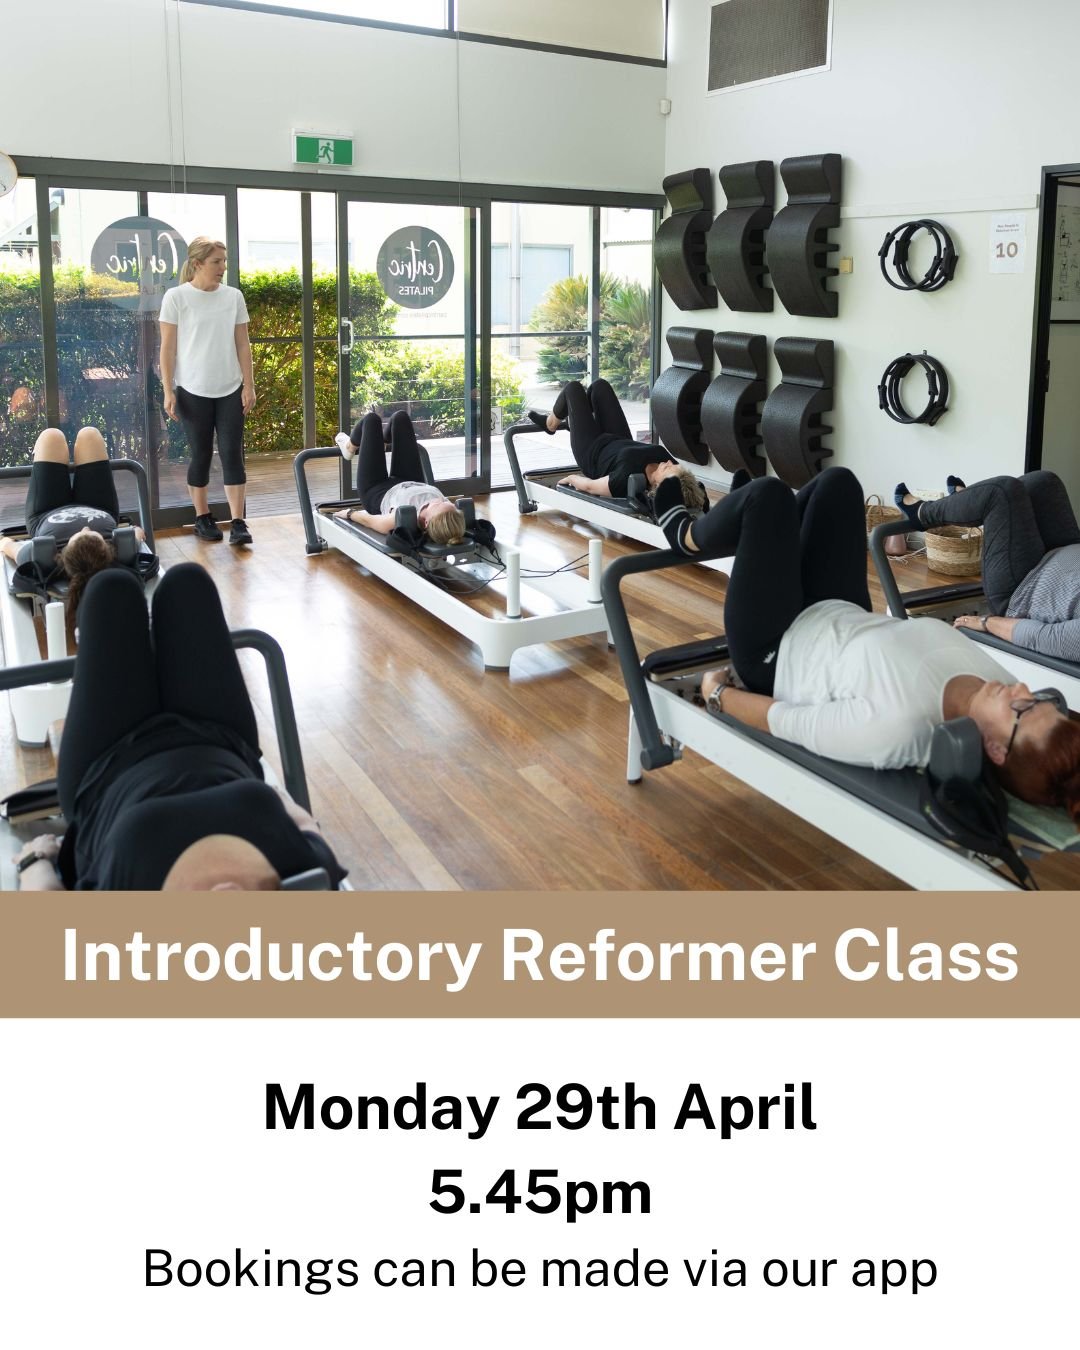 Are you looking to learn Pilates in a small reformer class? Our Pilates instructors have years of experience and, can teach you how to use the reformer and teach you Pilates correctly.

Our classes focus on core control, spinal elongation, strength a